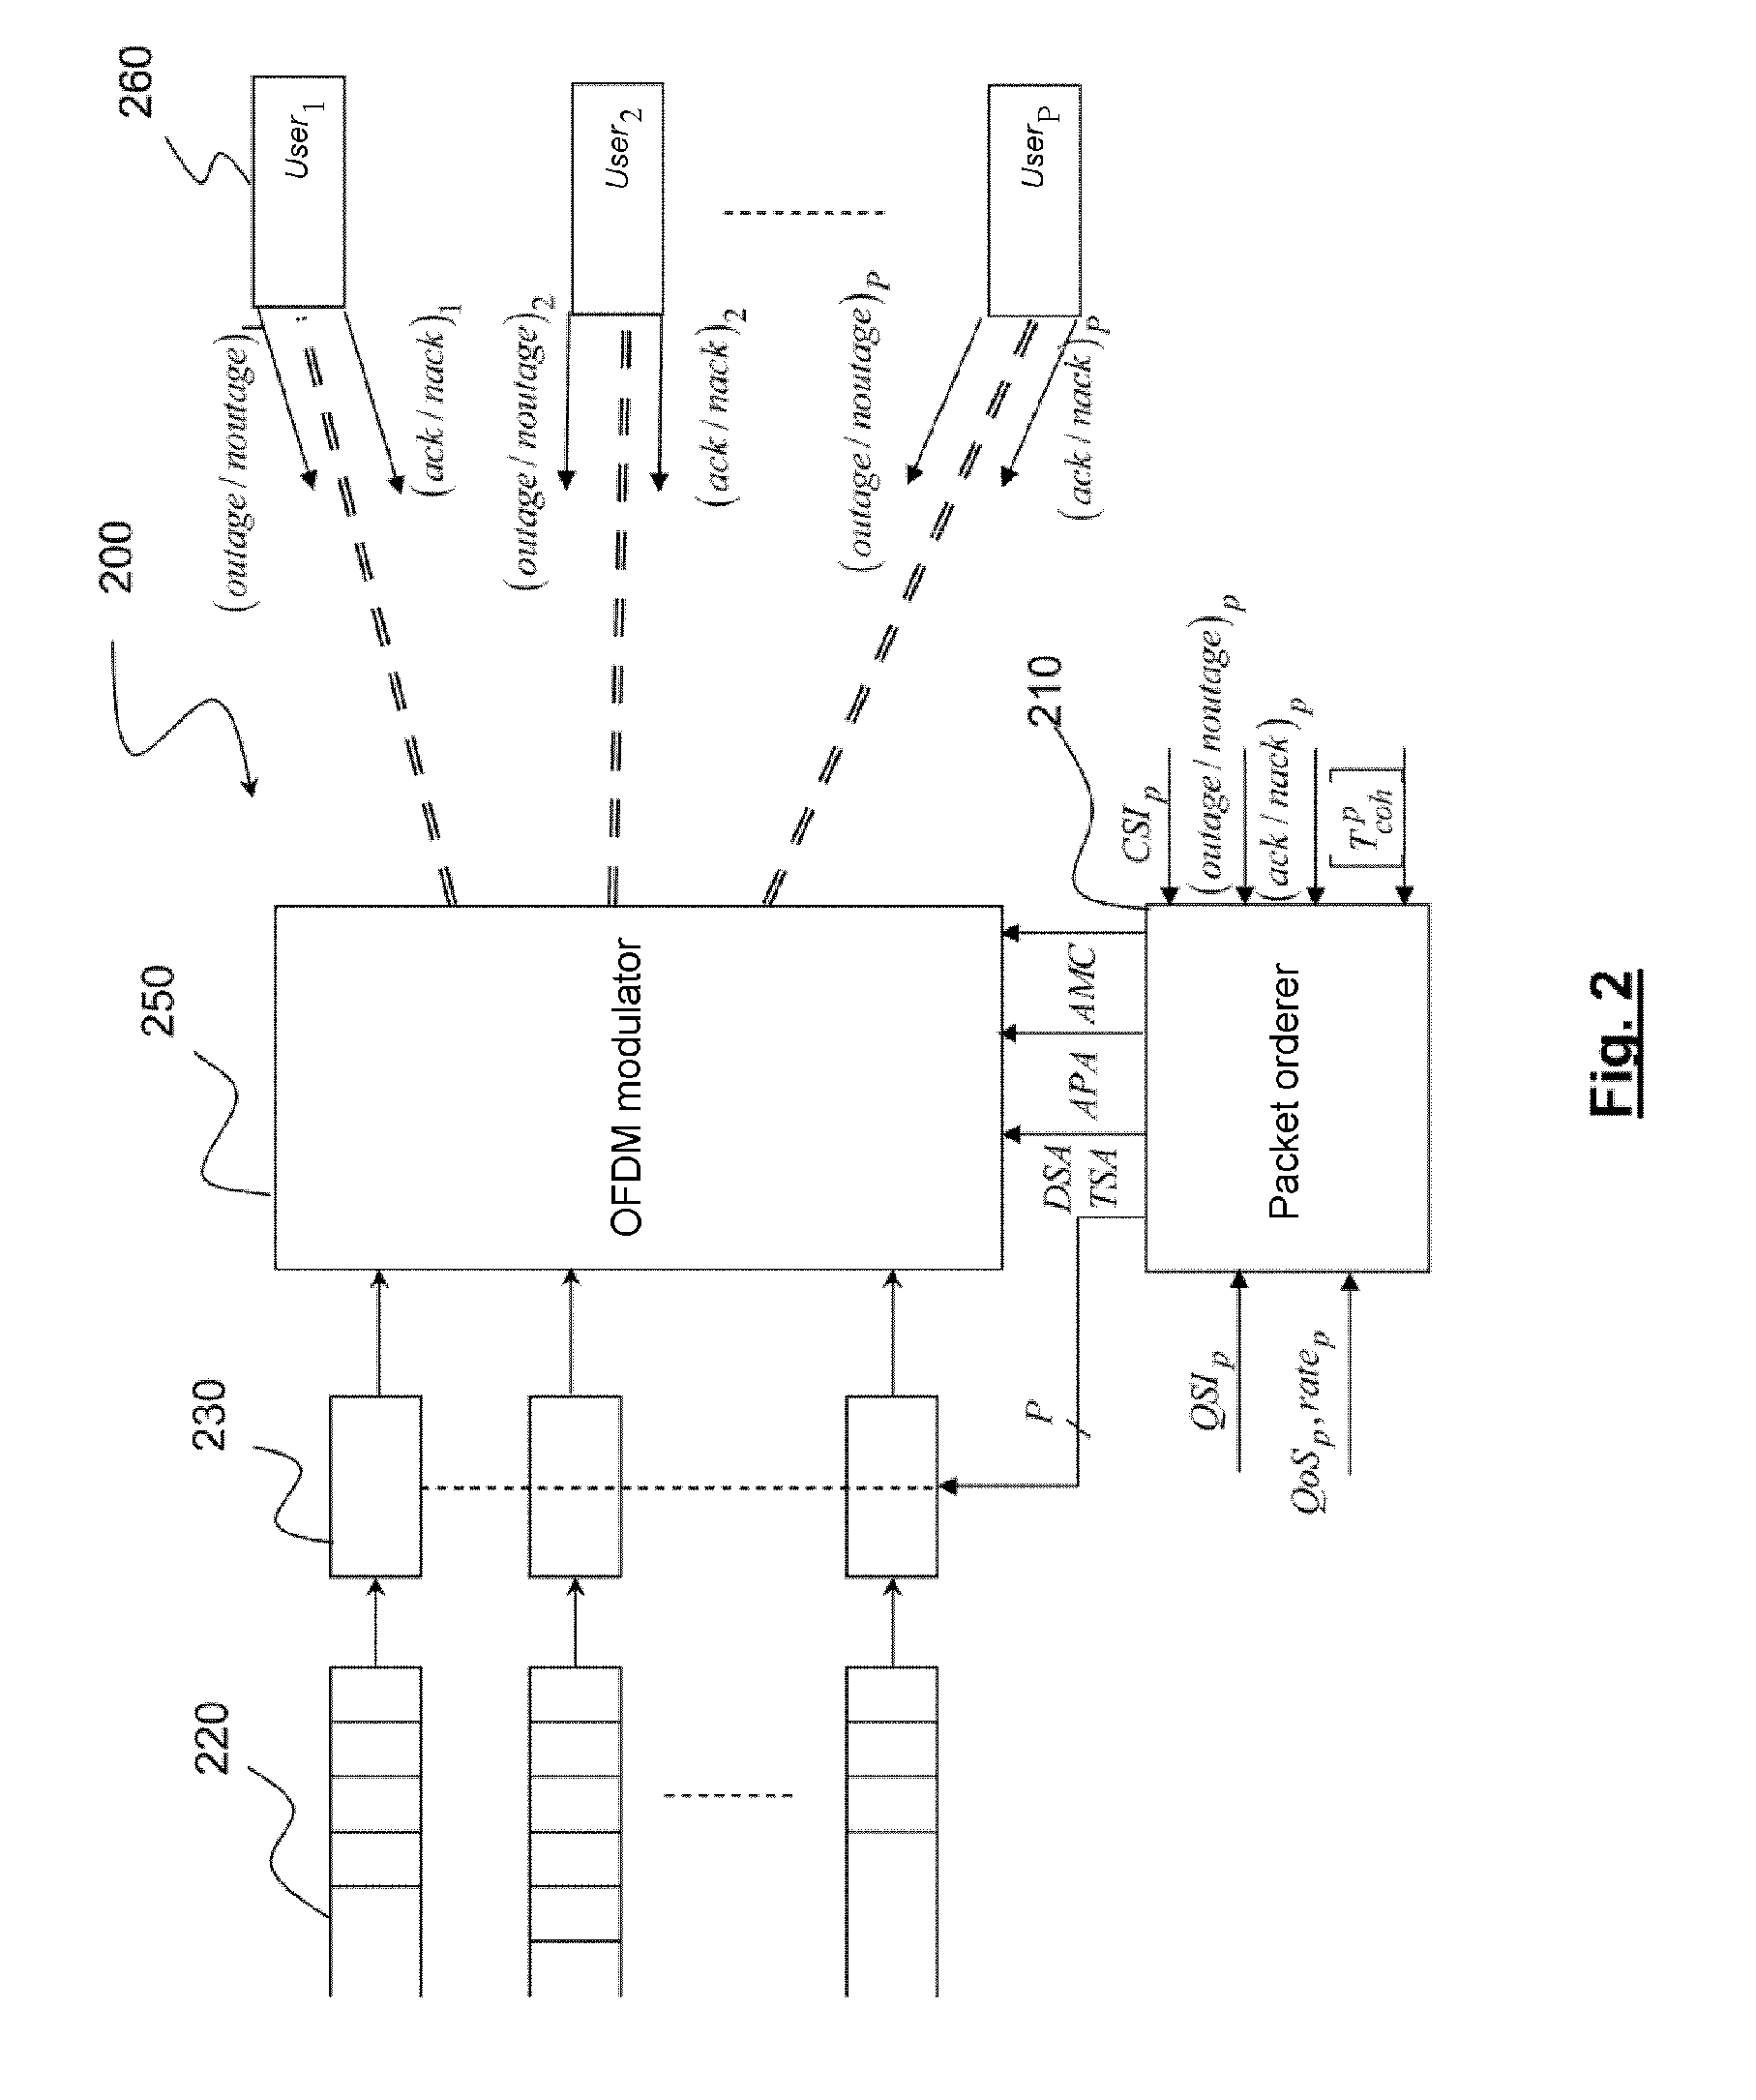 Multi-access telecommunications system with adapted strategy for packet retransmission